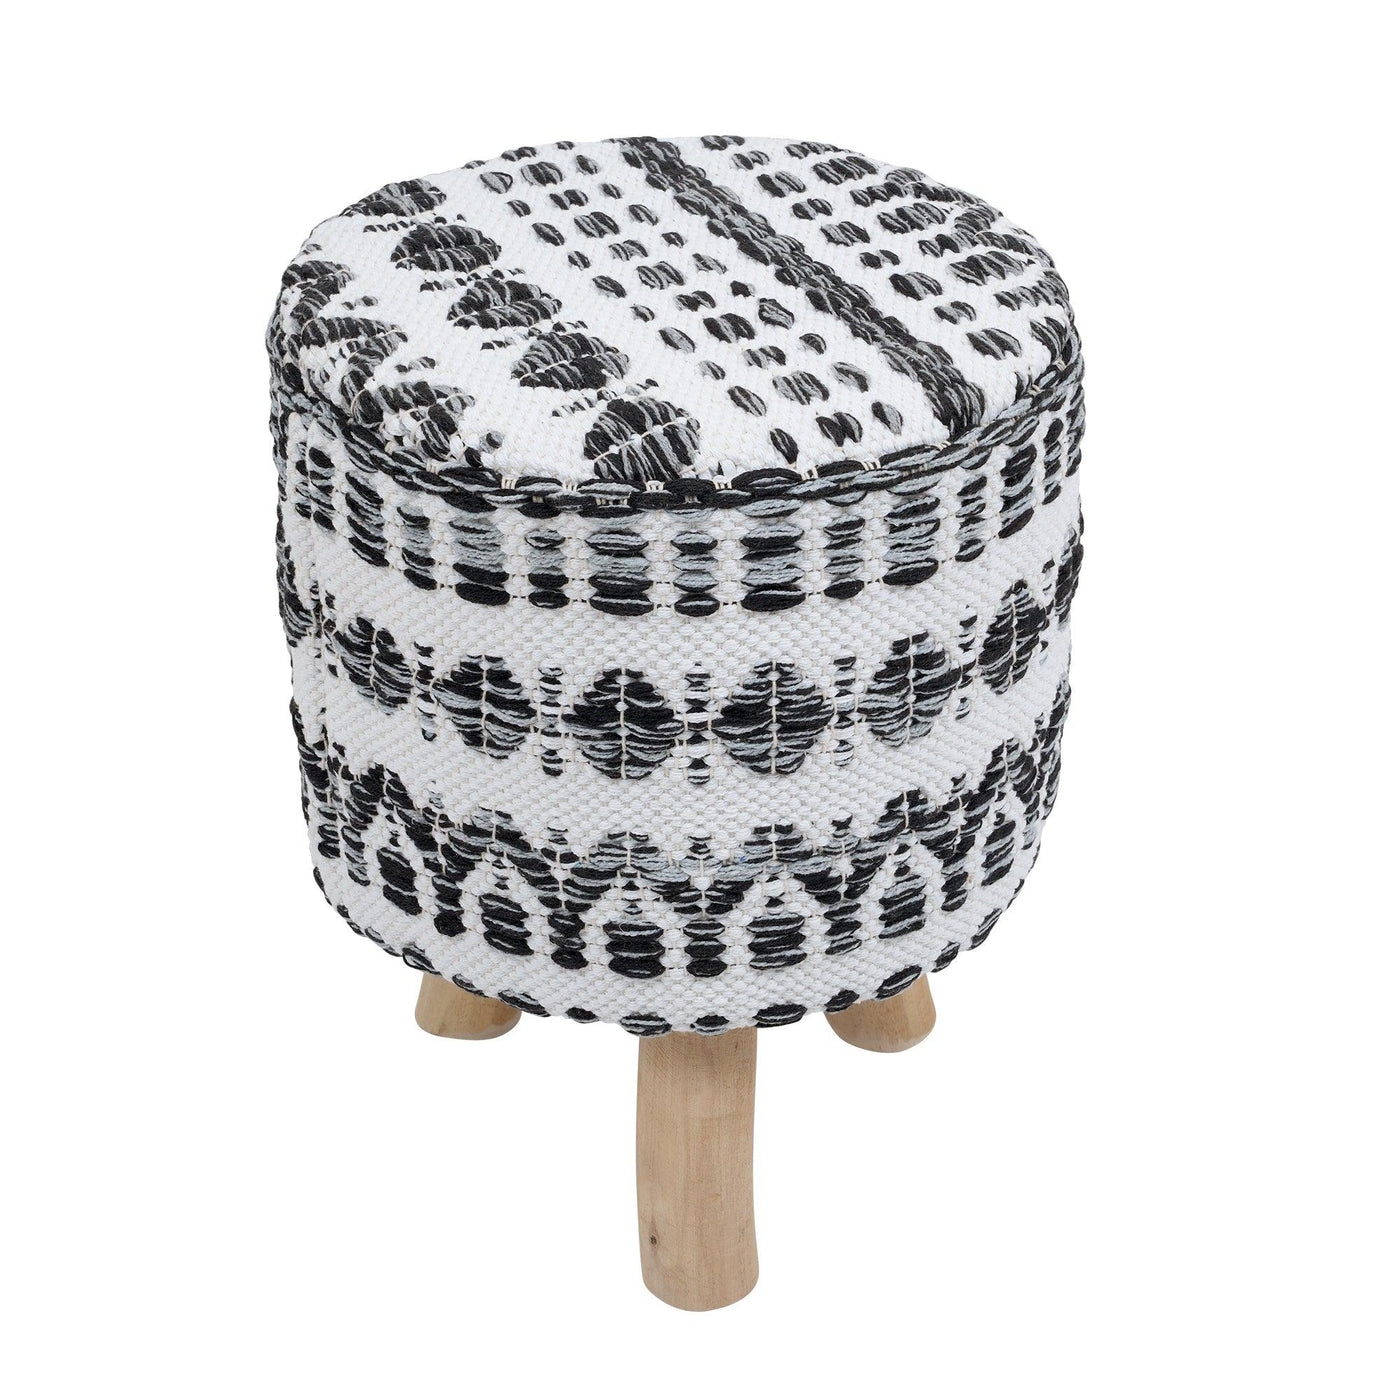 Canvello Grandcanyon Cotton with Wooden Legs Pouf Footstool, White/Black